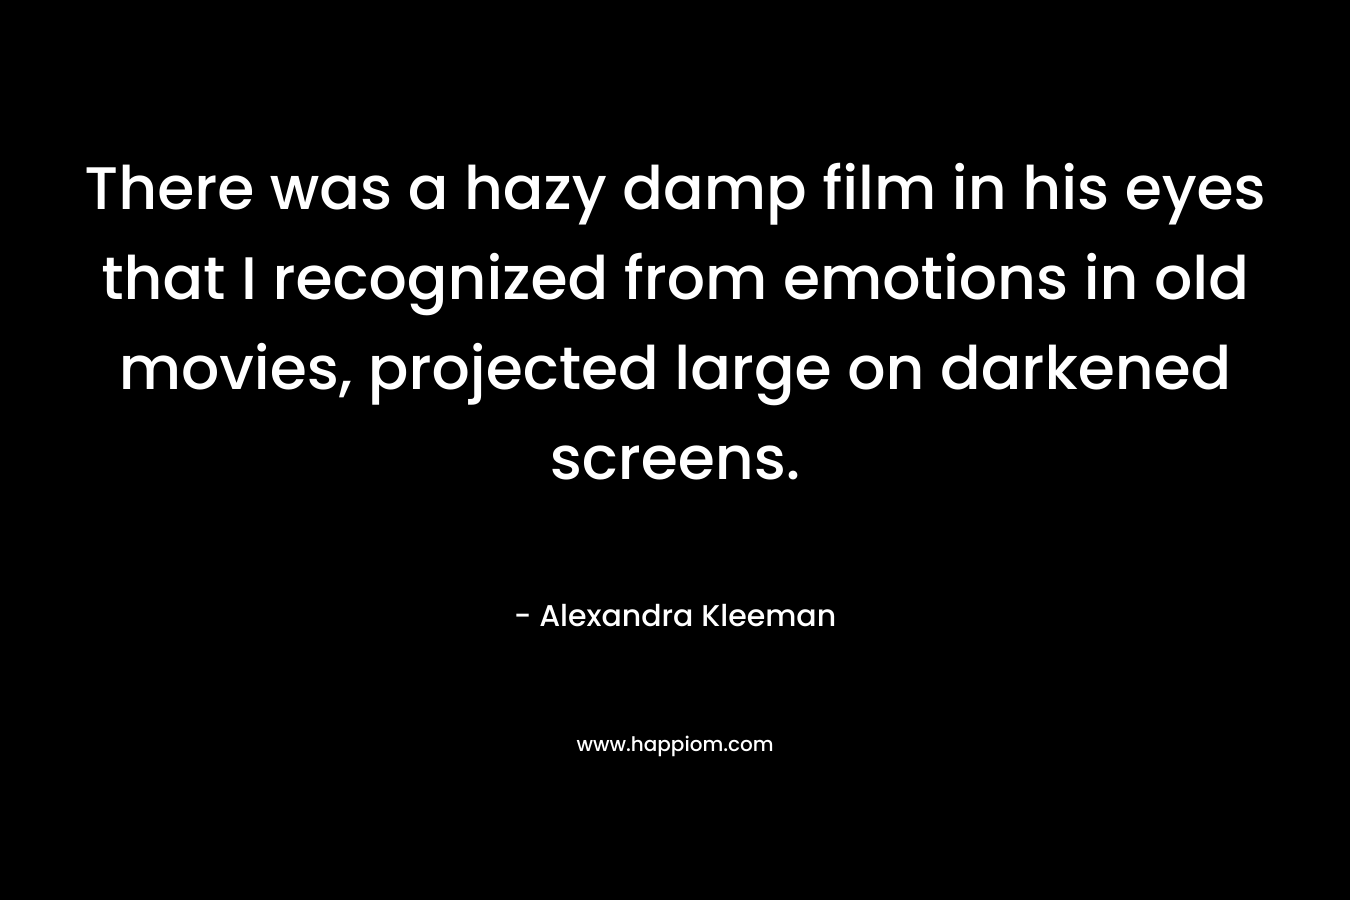 There was a hazy damp film in his eyes that I recognized from emotions in old movies, projected large on darkened screens. – Alexandra Kleeman